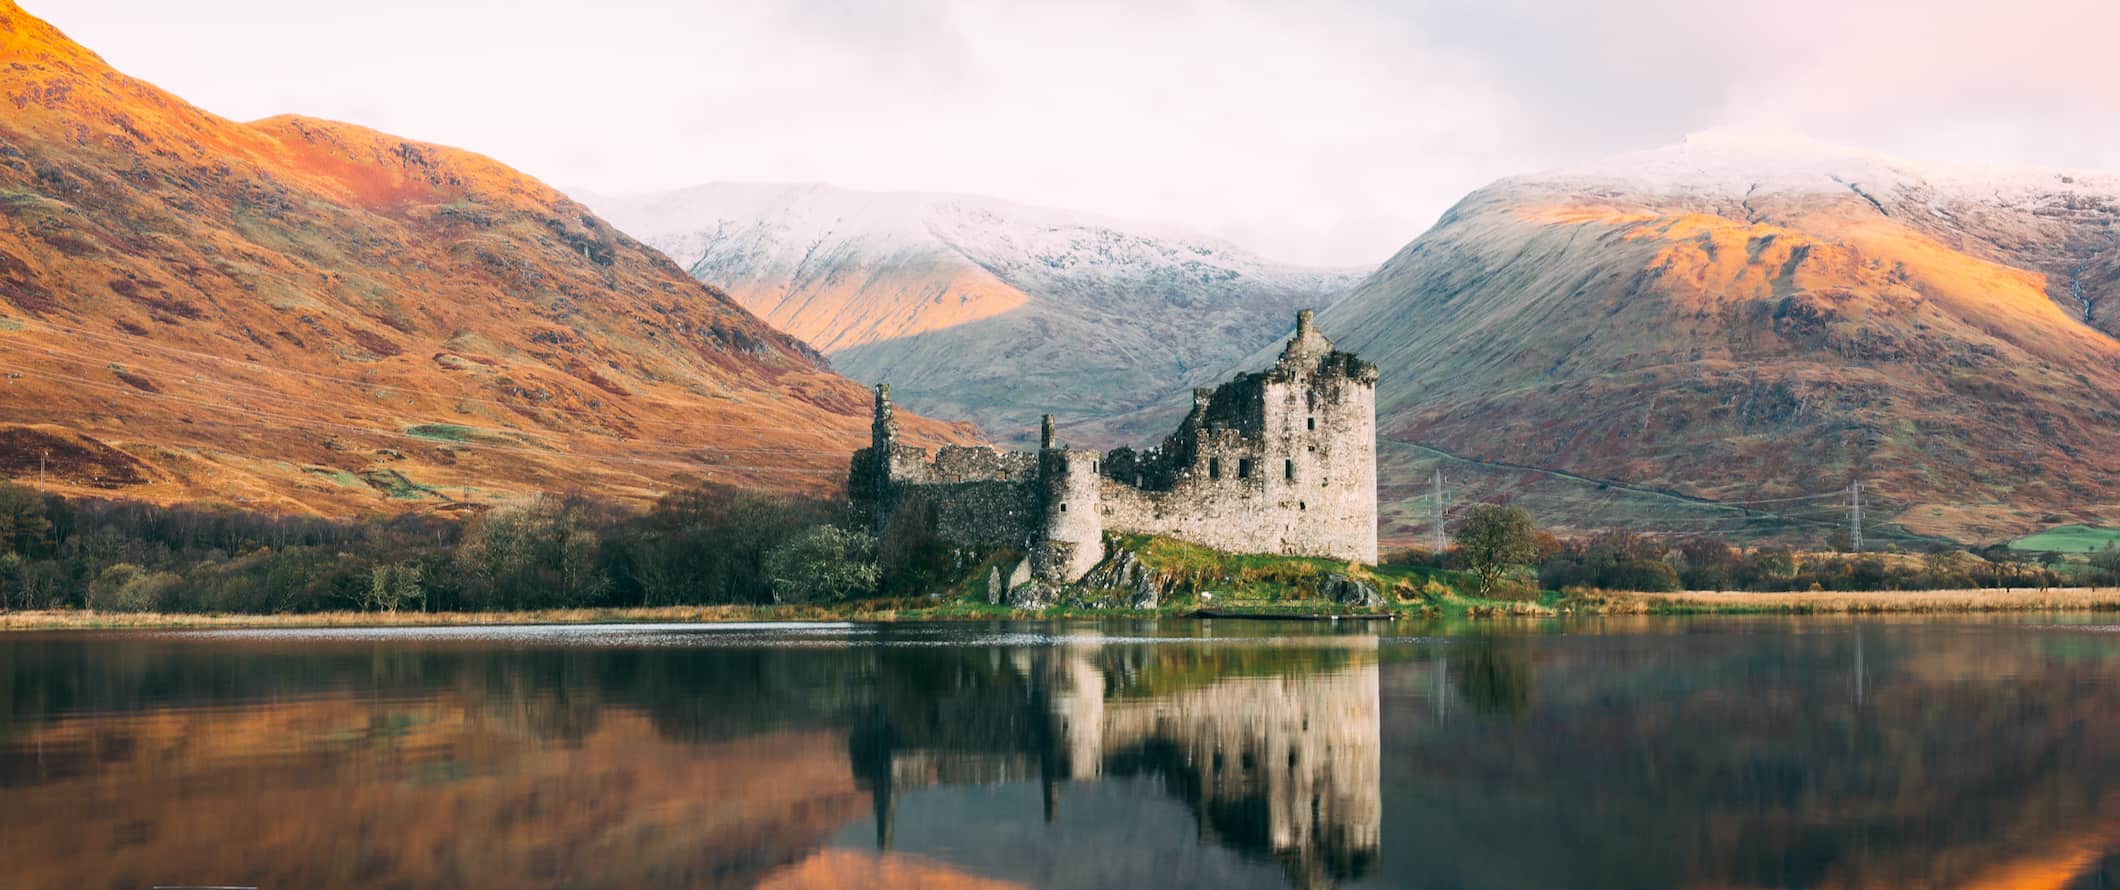 A historic castle in Scotland near the water in the highlands